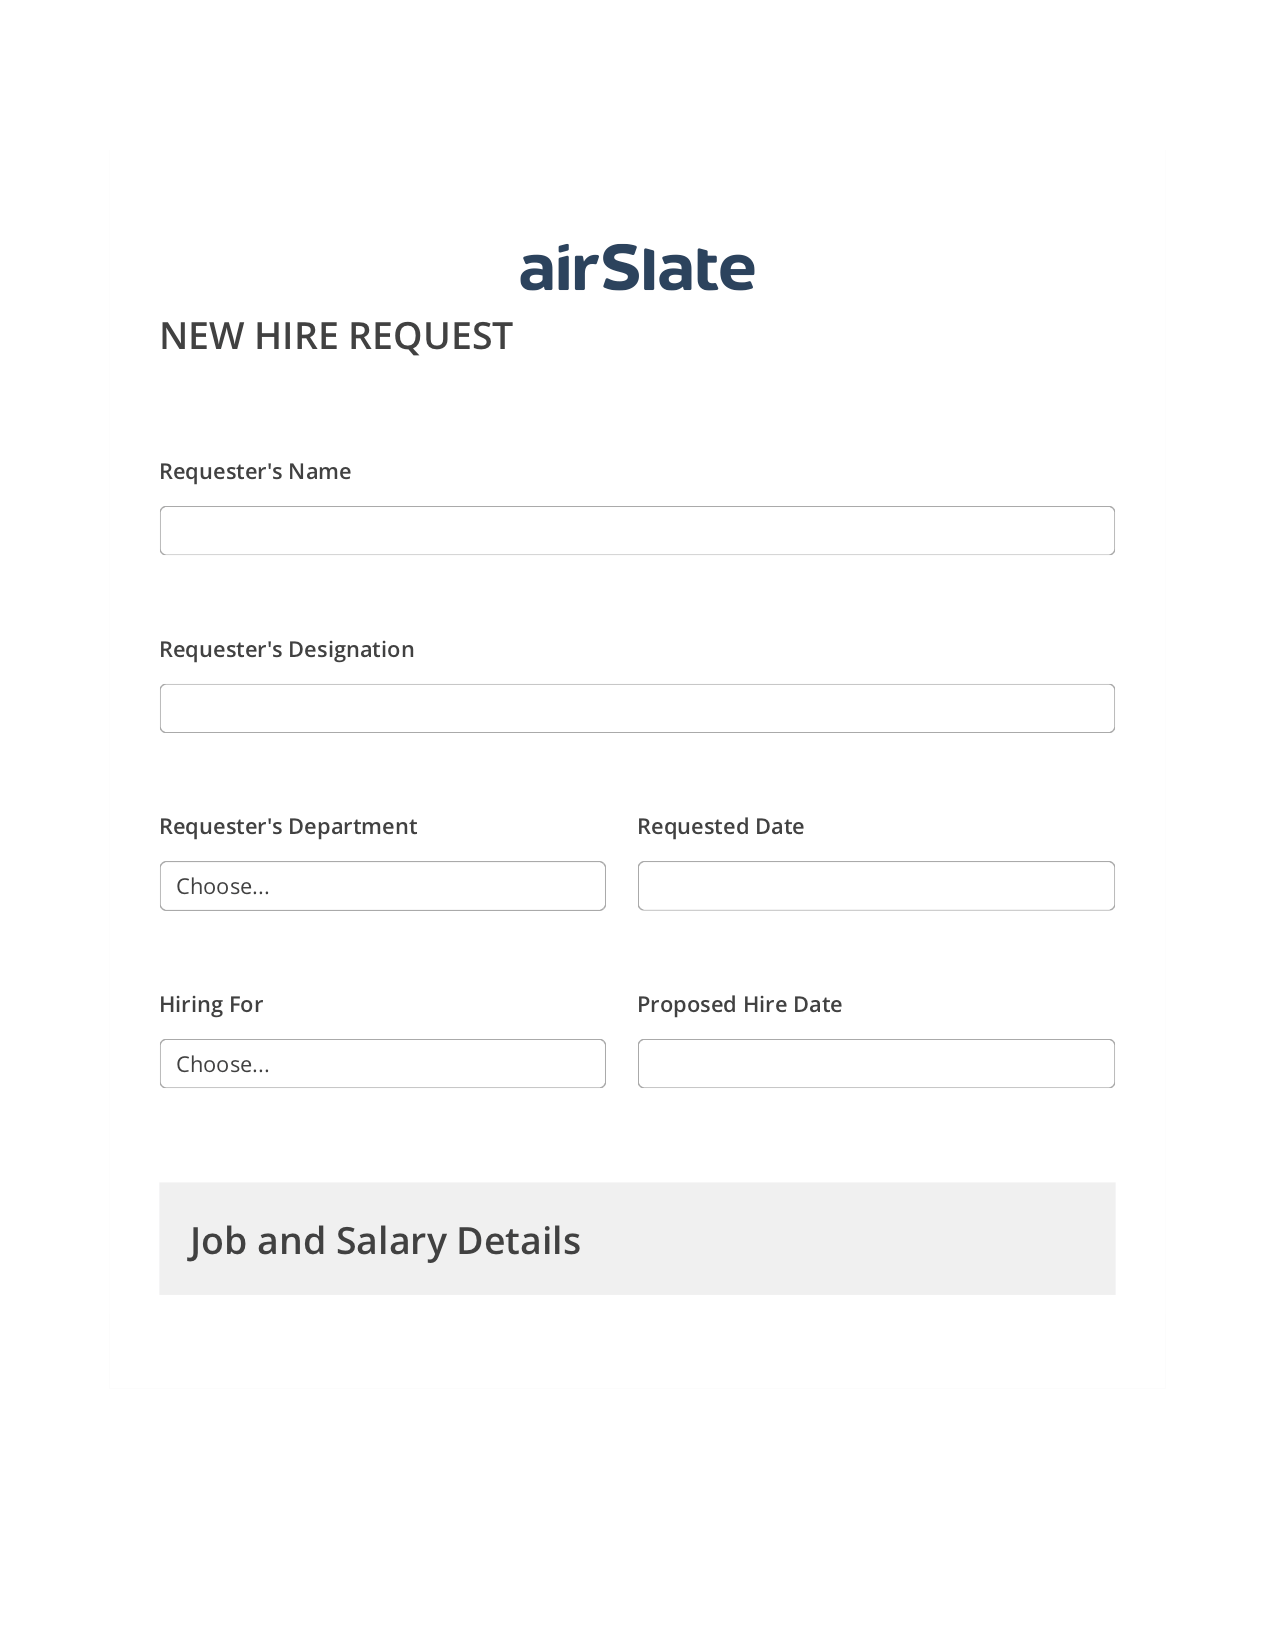 Hiring Request Workflow Pre-fill Dropdowns from CSV file Bot, Assign Roles to Recipients Bot, Archive to SharePoint Folder Bot